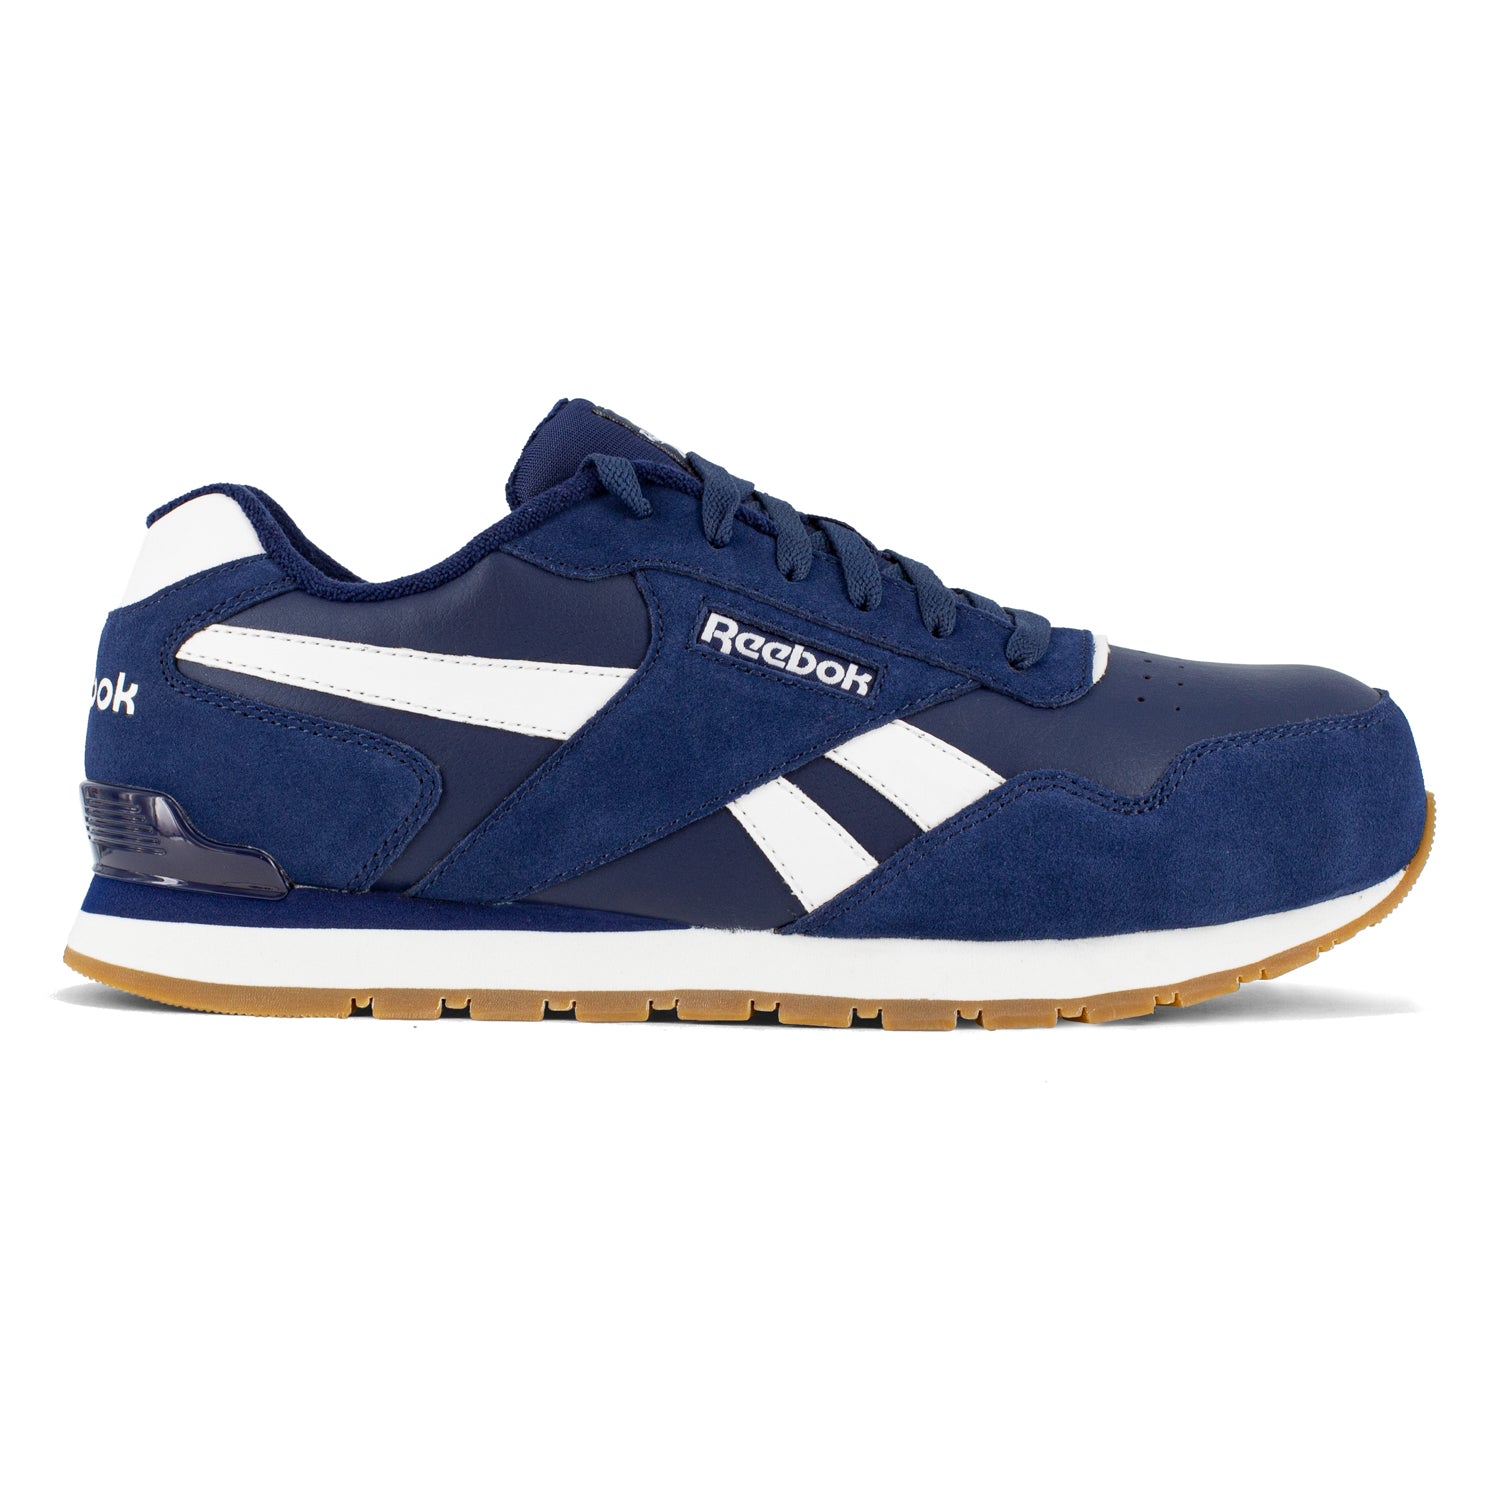 Reebok Navy/White Leather Shoes Harman Sneaker CT – The Western Company